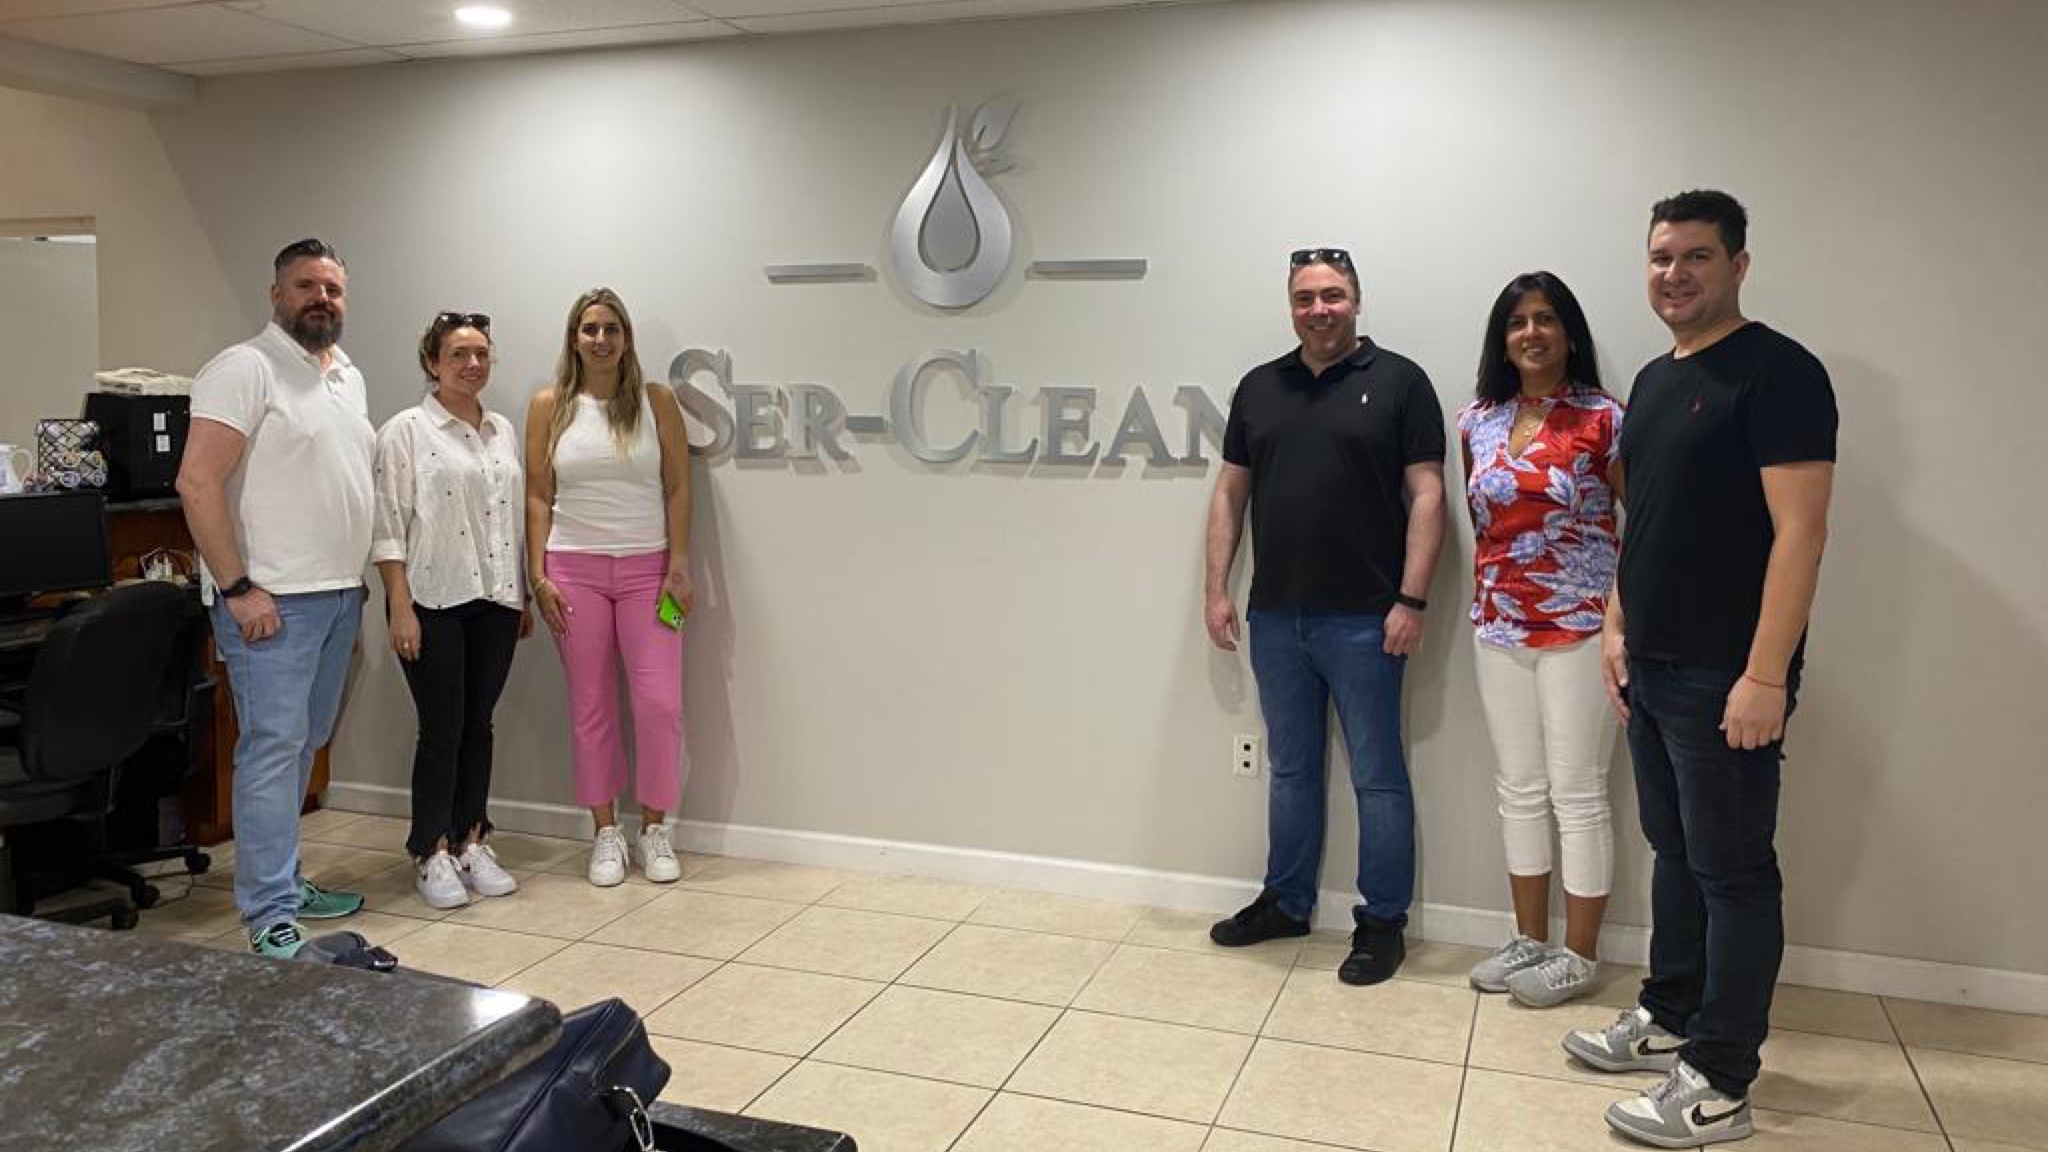 Miami | Group photo HFC and laundry partner Ser Clean